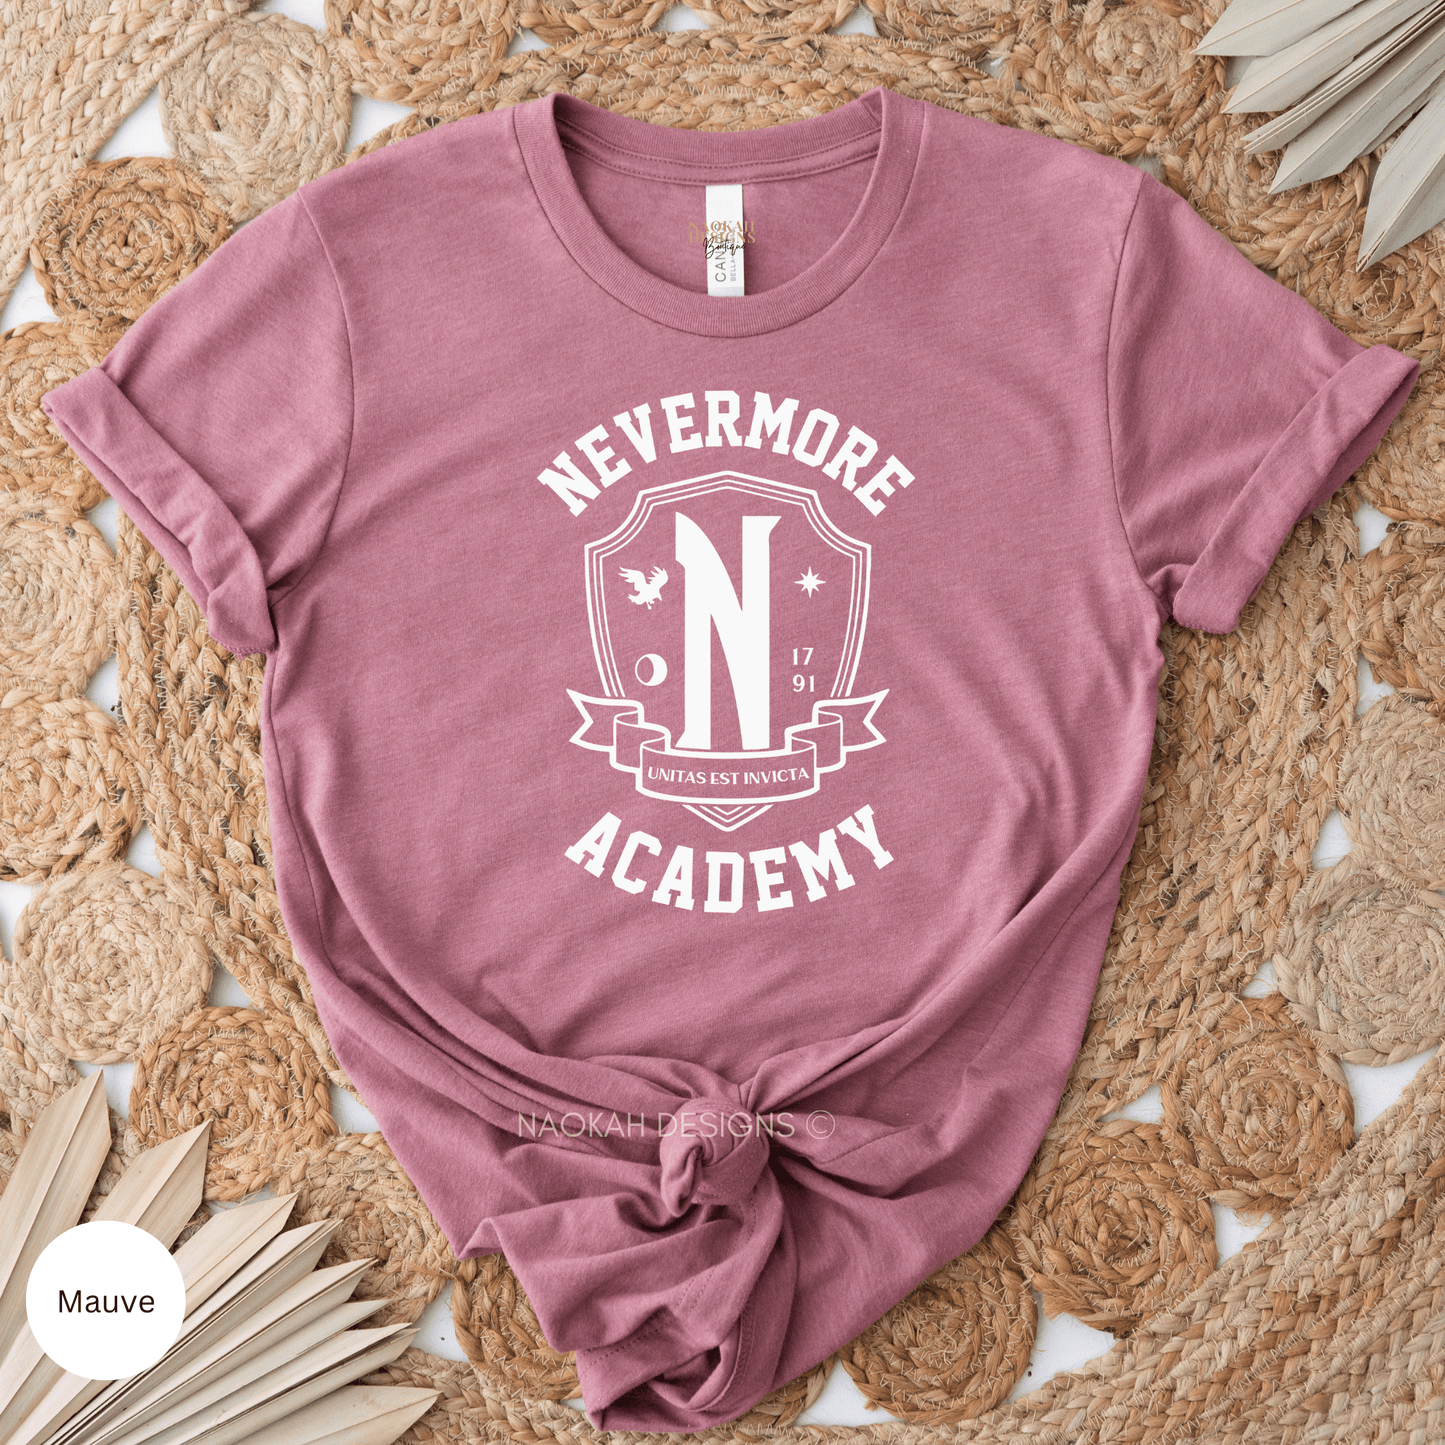 nevermore academy 1971 shirt, addams family sweatshirt, wednesday addams , wednesday adams, wednesday addams dancing, gothic shirt